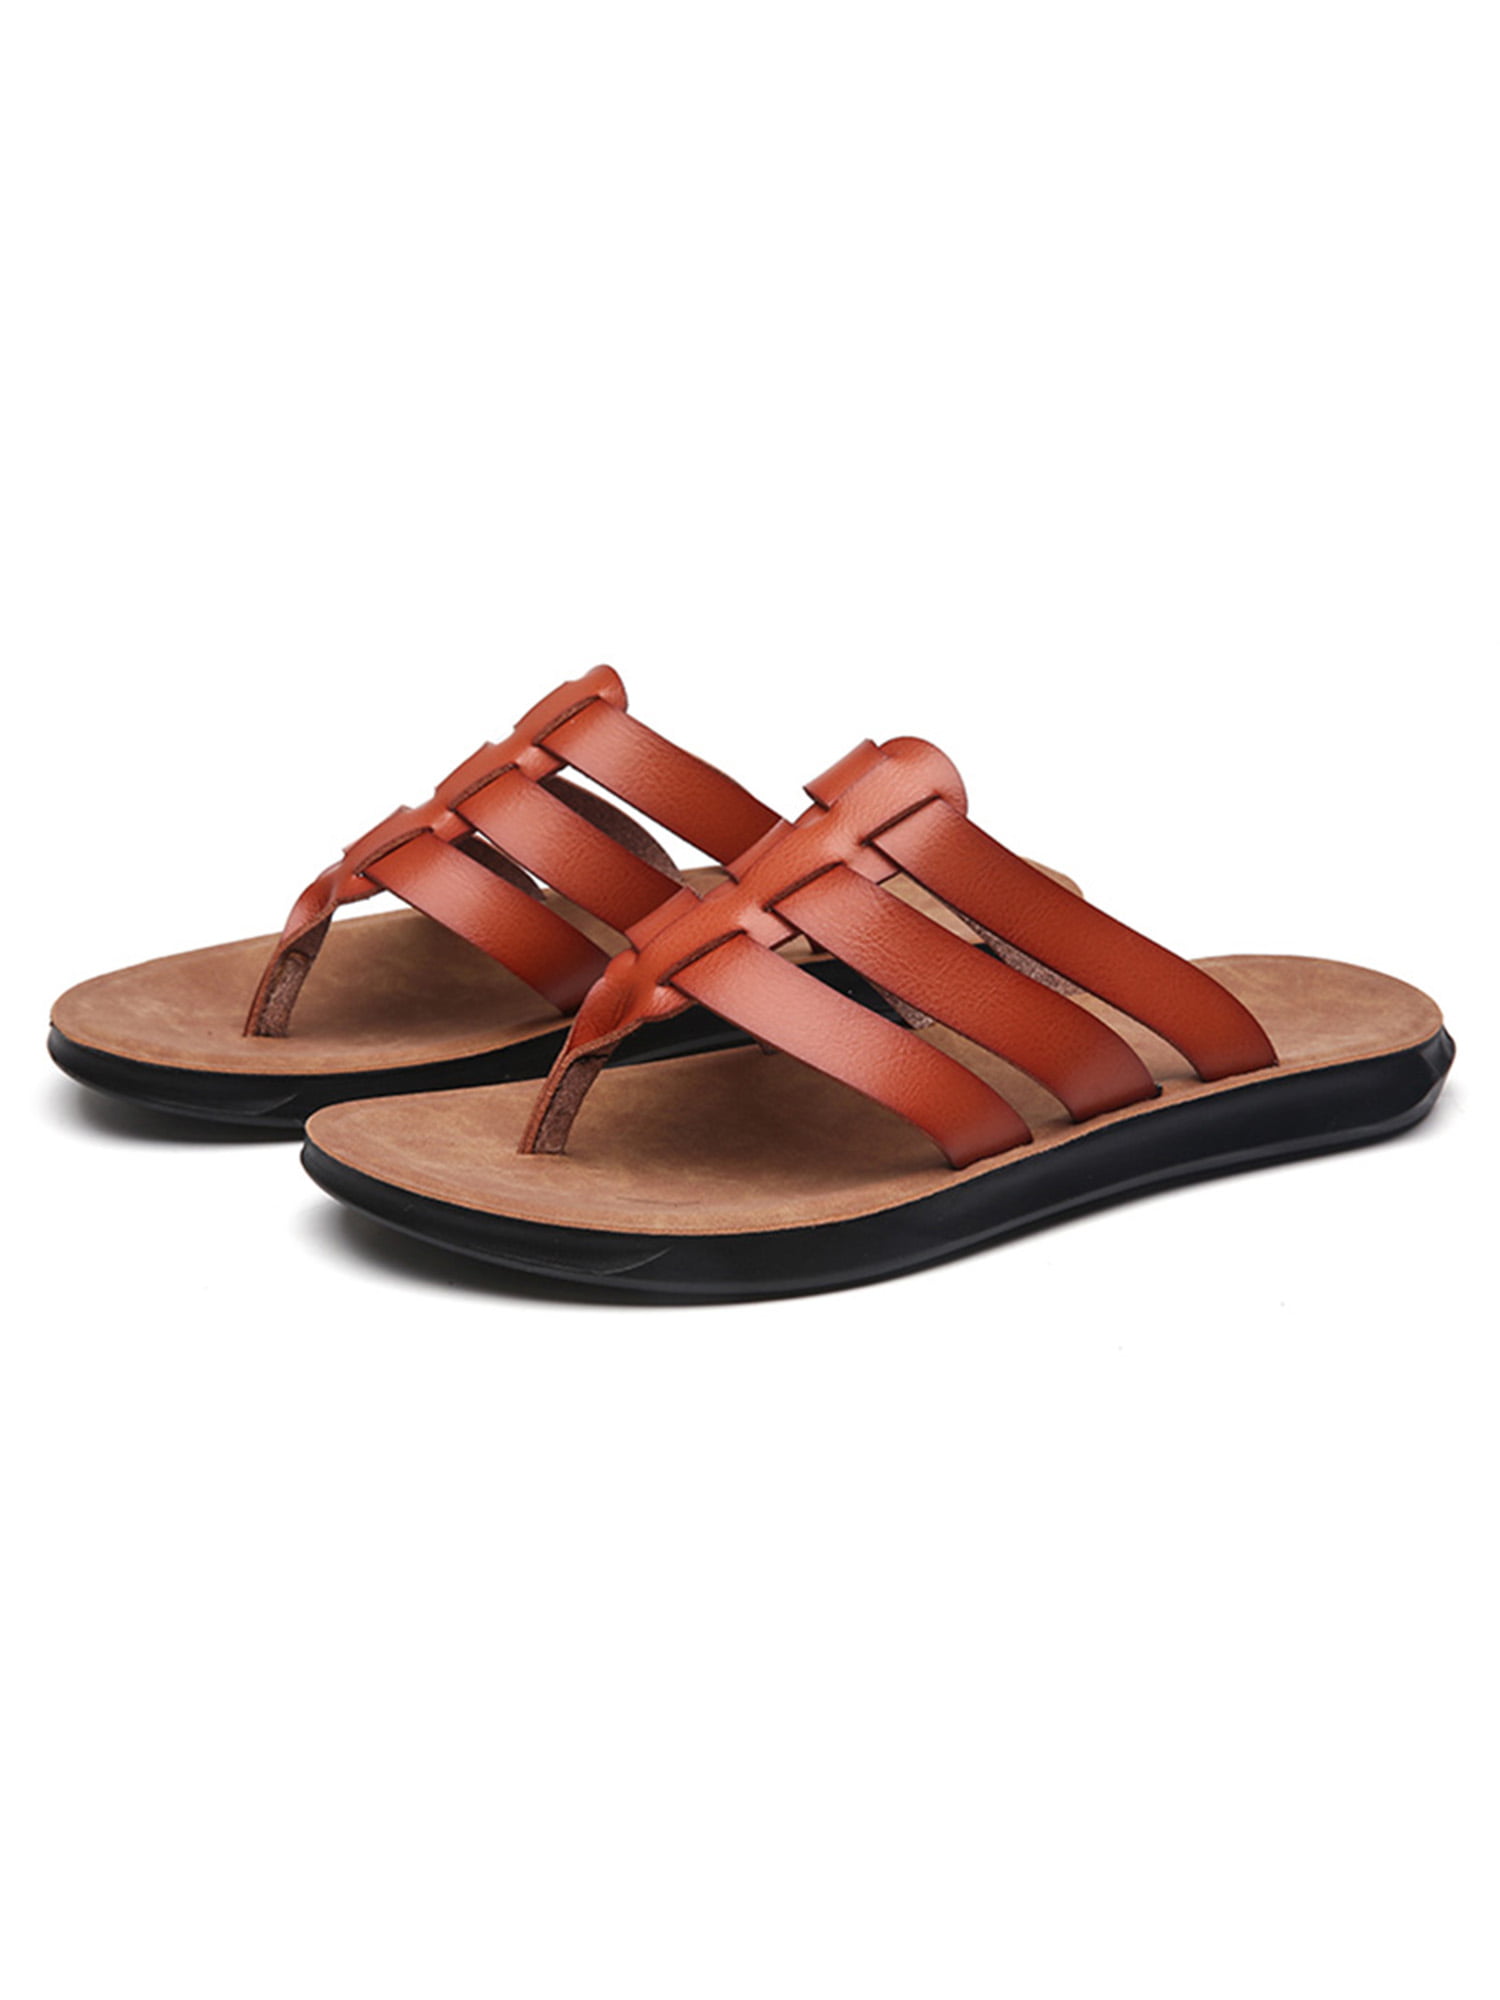 Mens New Summer Faux Leather Rugged Fashion Casual Beach Sandals Flip Flops Mule 